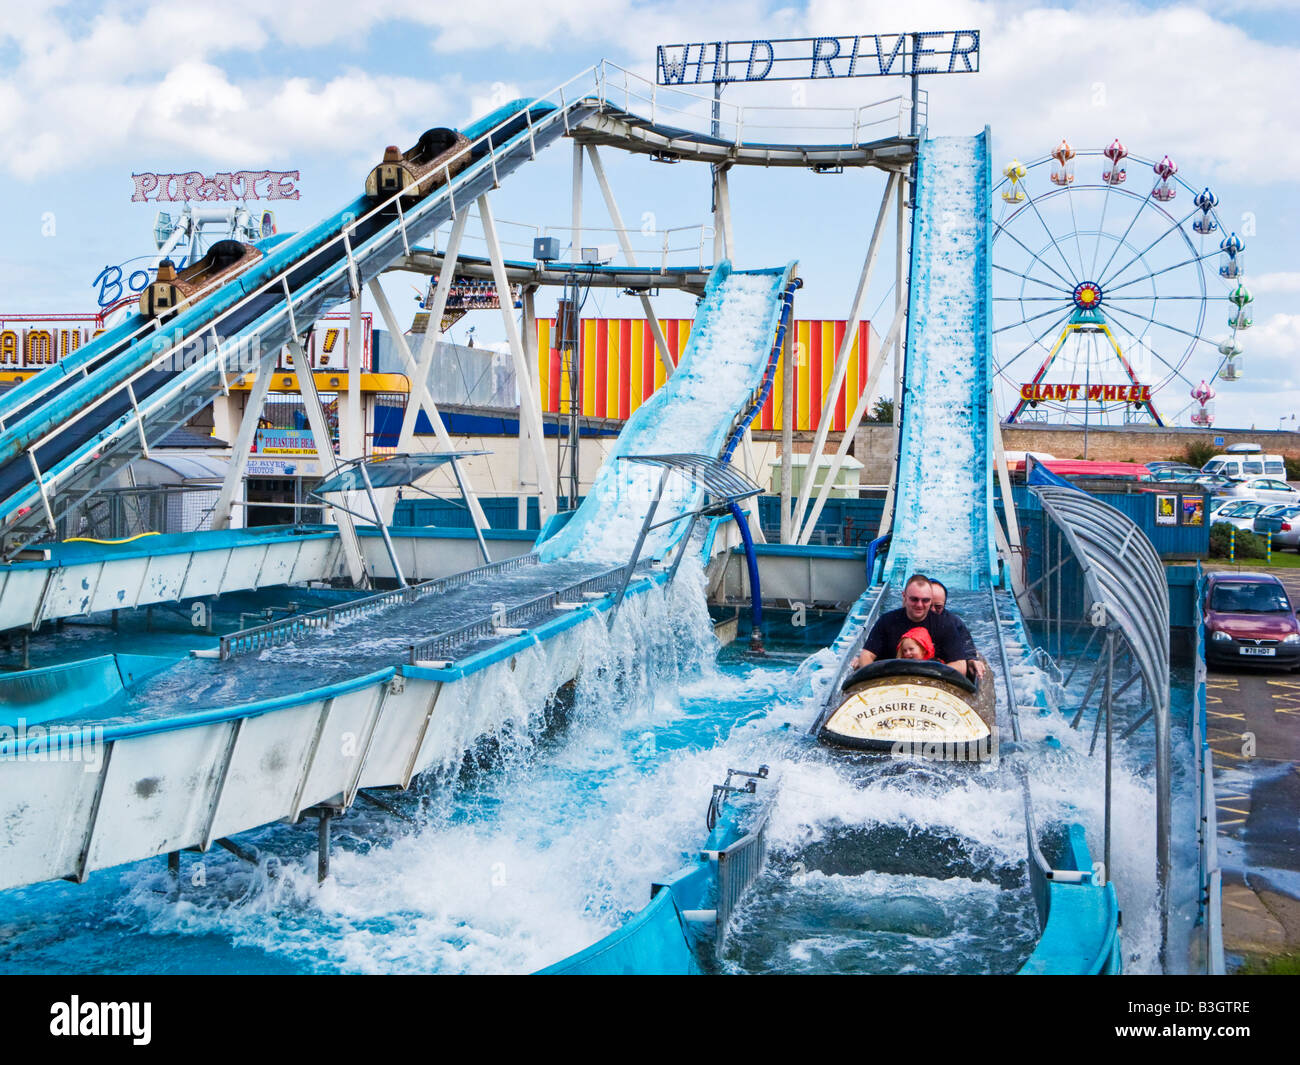 Family having fun on the Log flume at Skegness seafront fairground amusement park Lincolnshire England UK Stock Photo